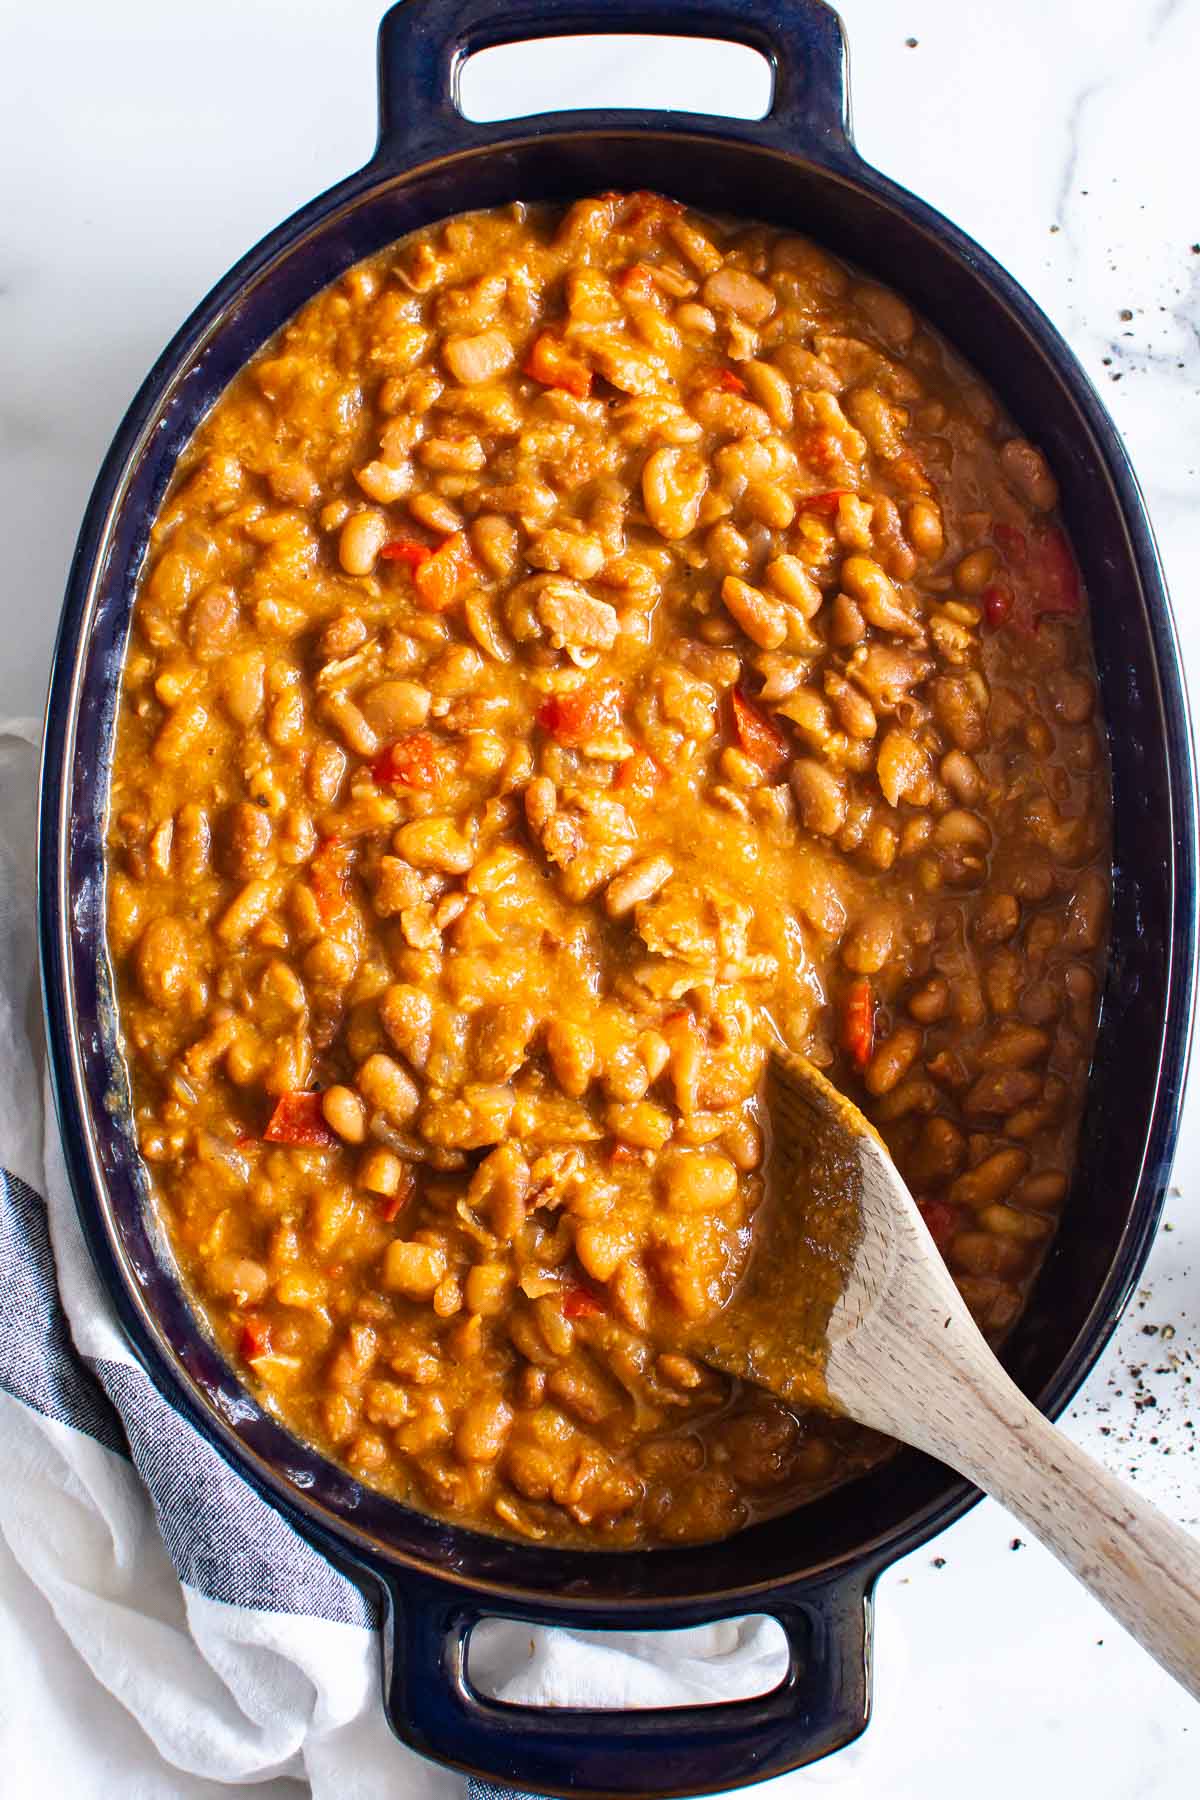 Instant pot baked beans in blue serving dish with wooden spoon.